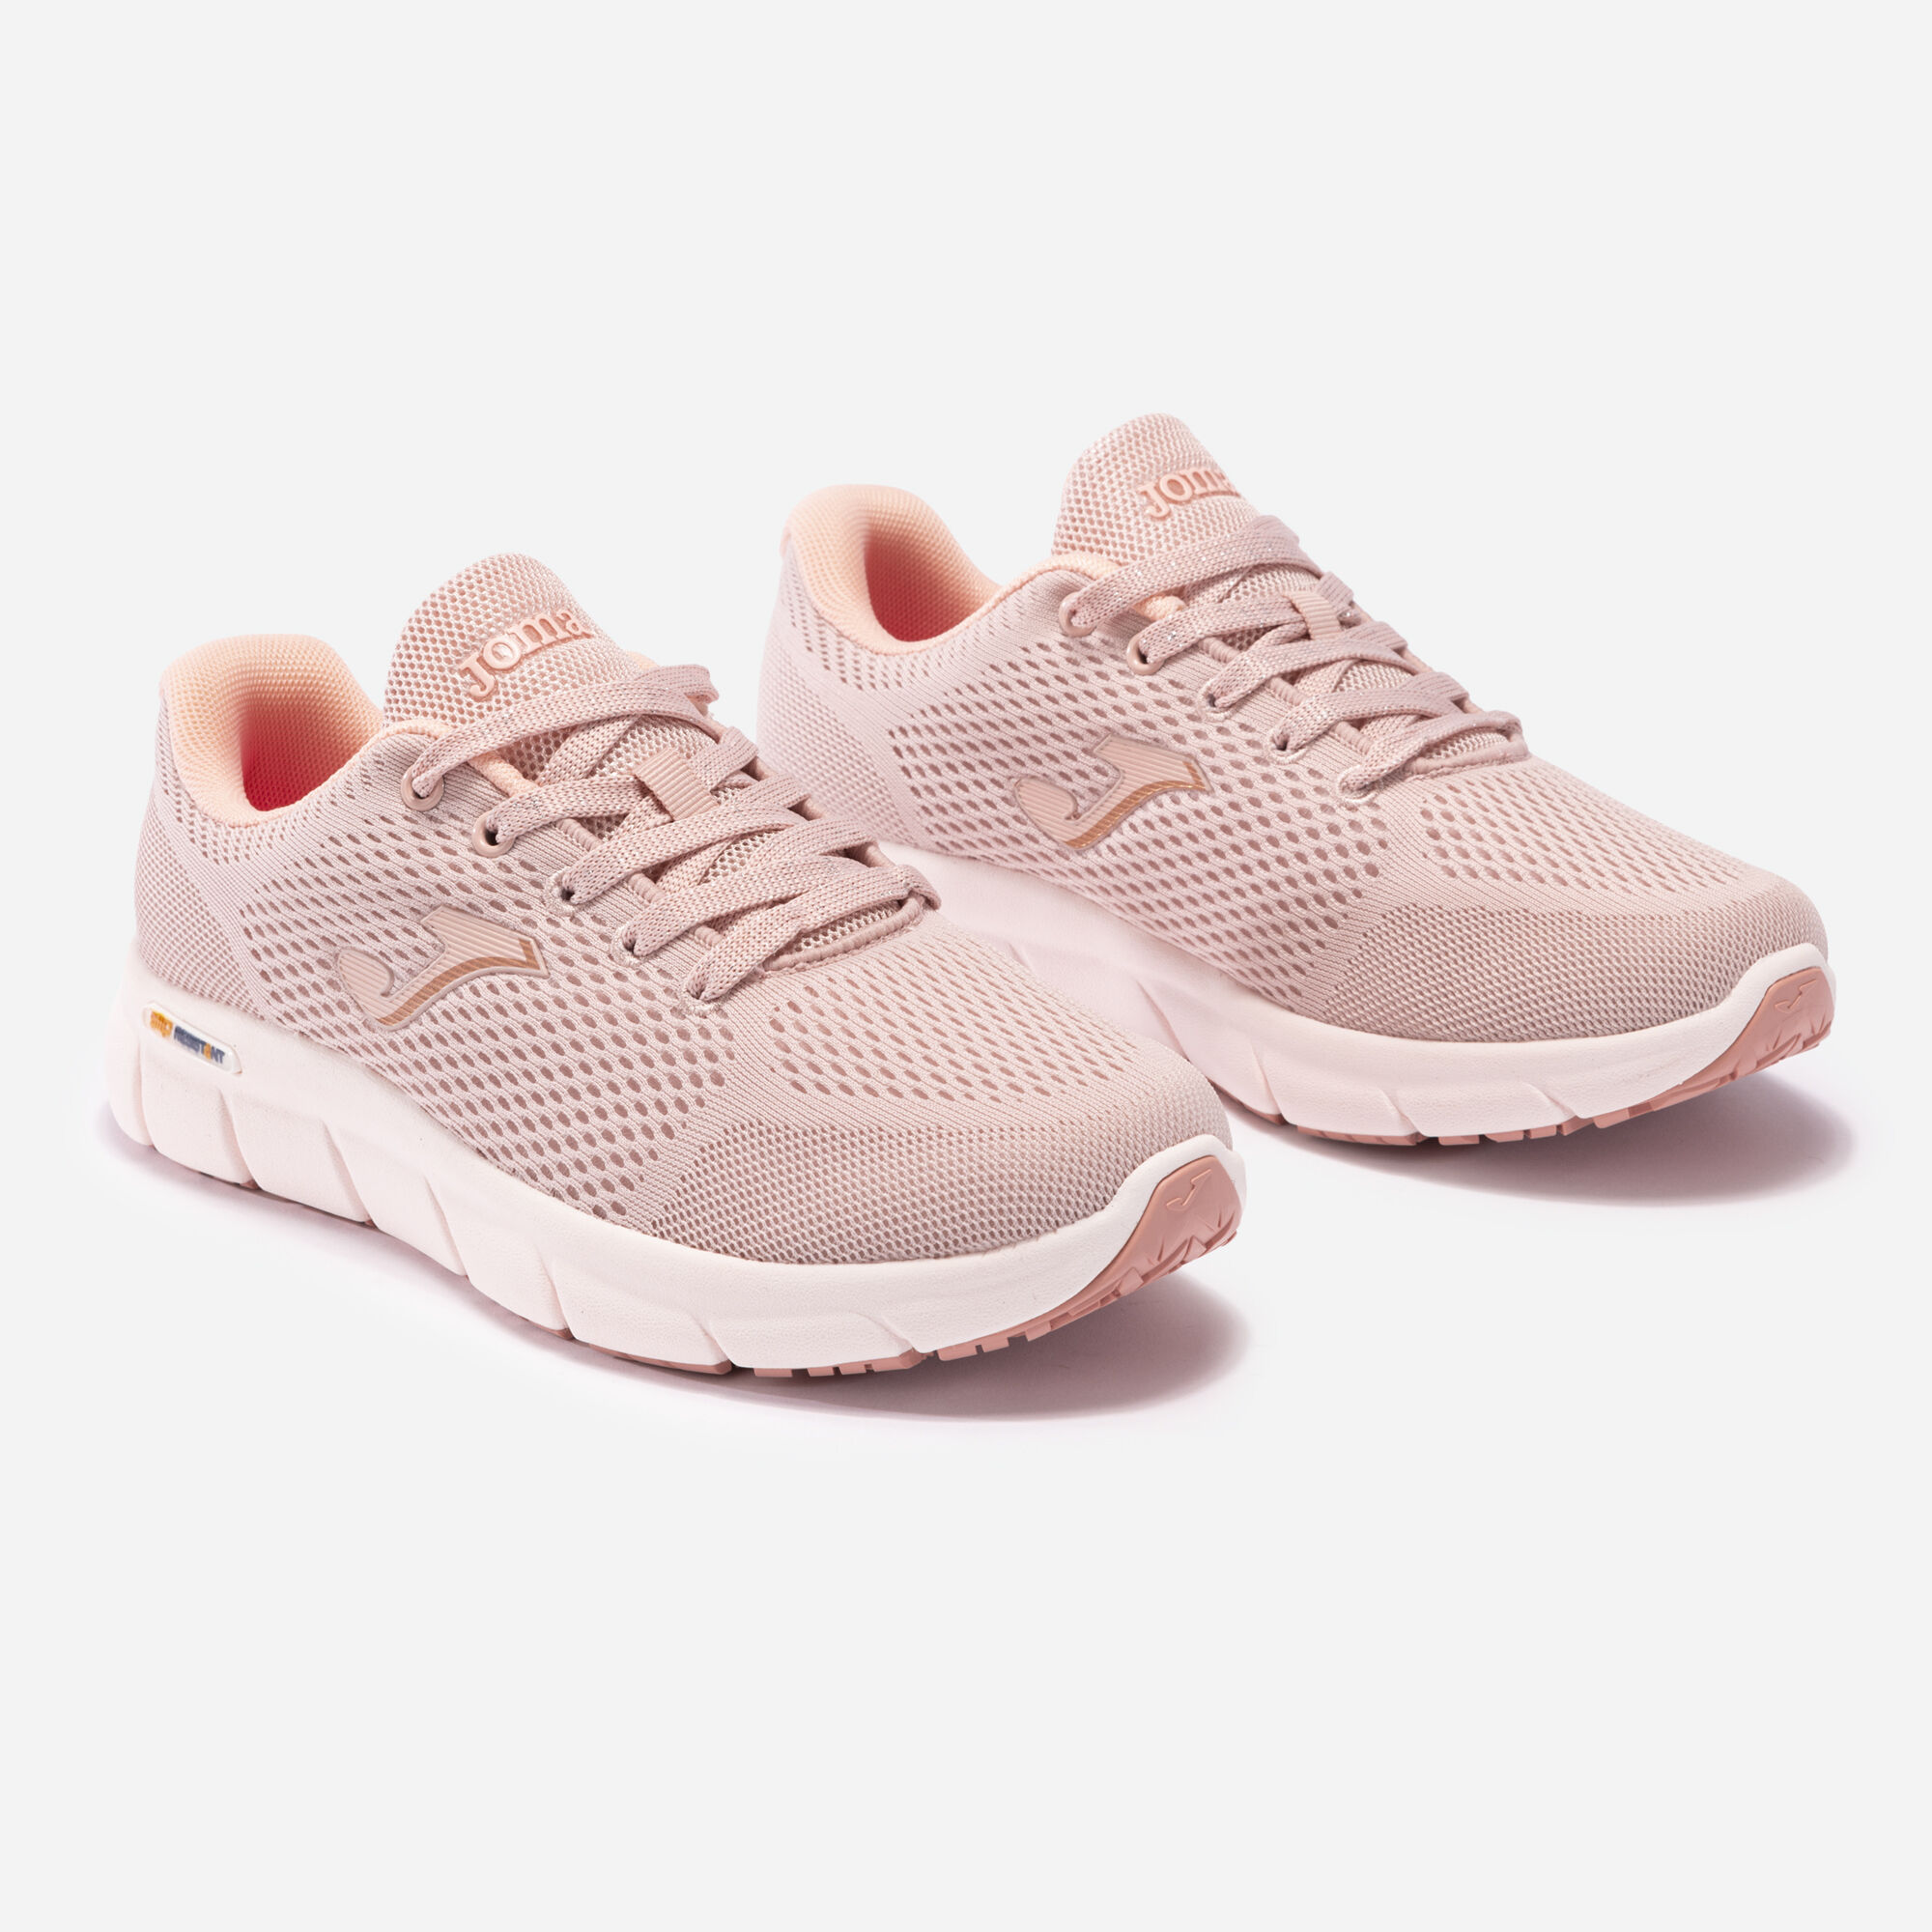 Chaussures casual Zen Lady 23 femme rose